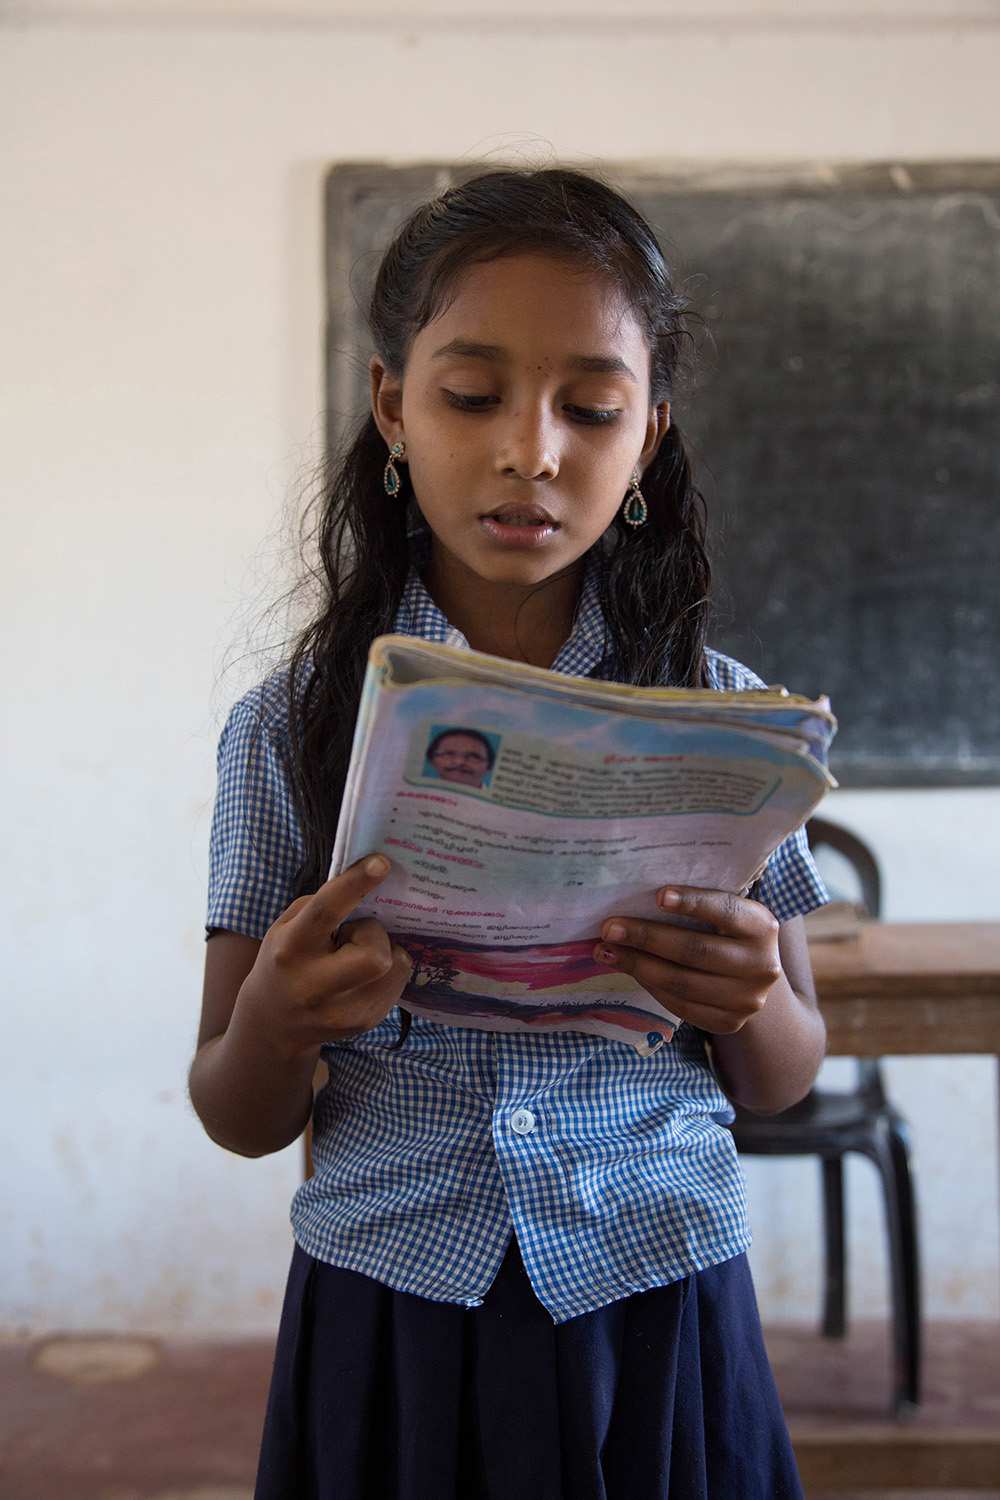 Preethi reads at the front of her class - a common practice at the school.